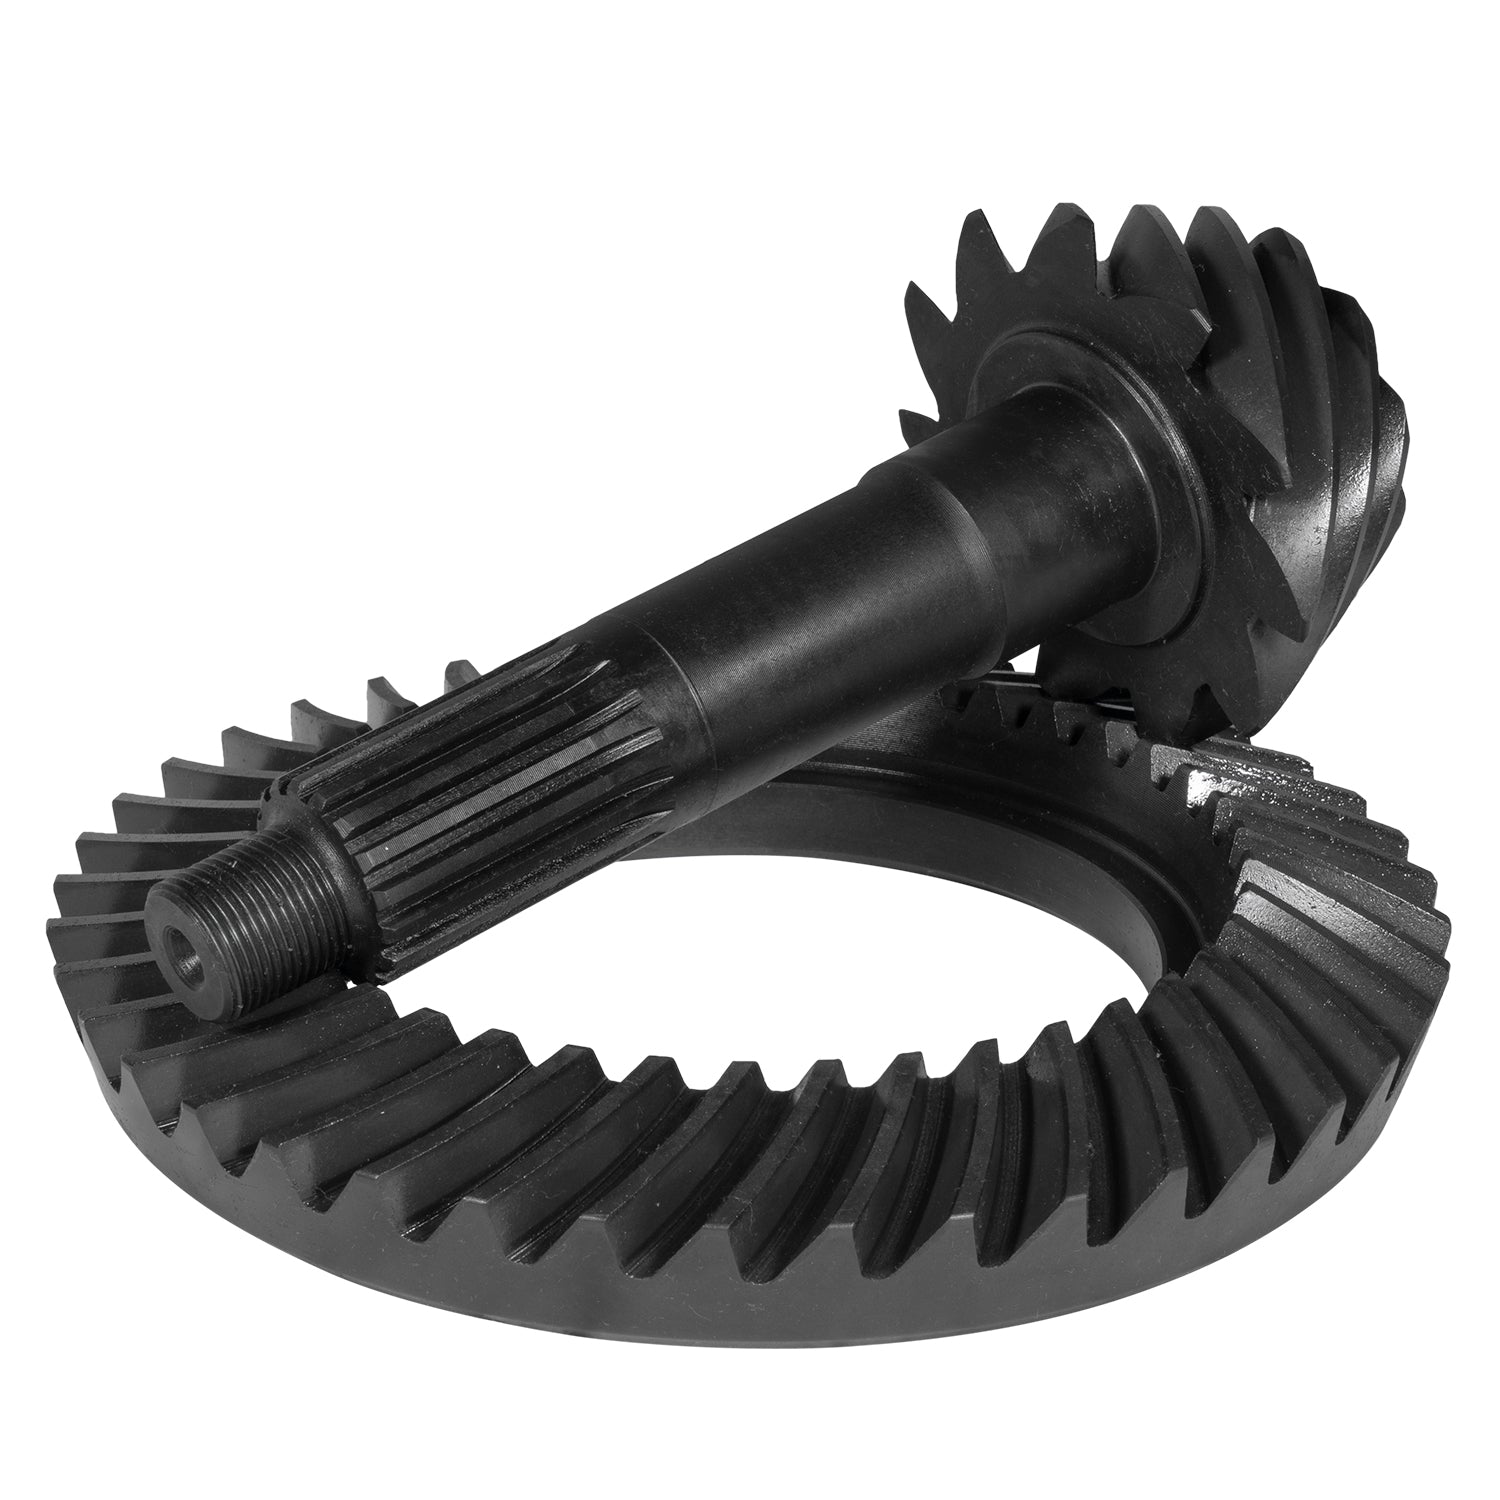 Yukon Gear Chevrolet Differential Ring and Pinion Kit - Rear YGK2364